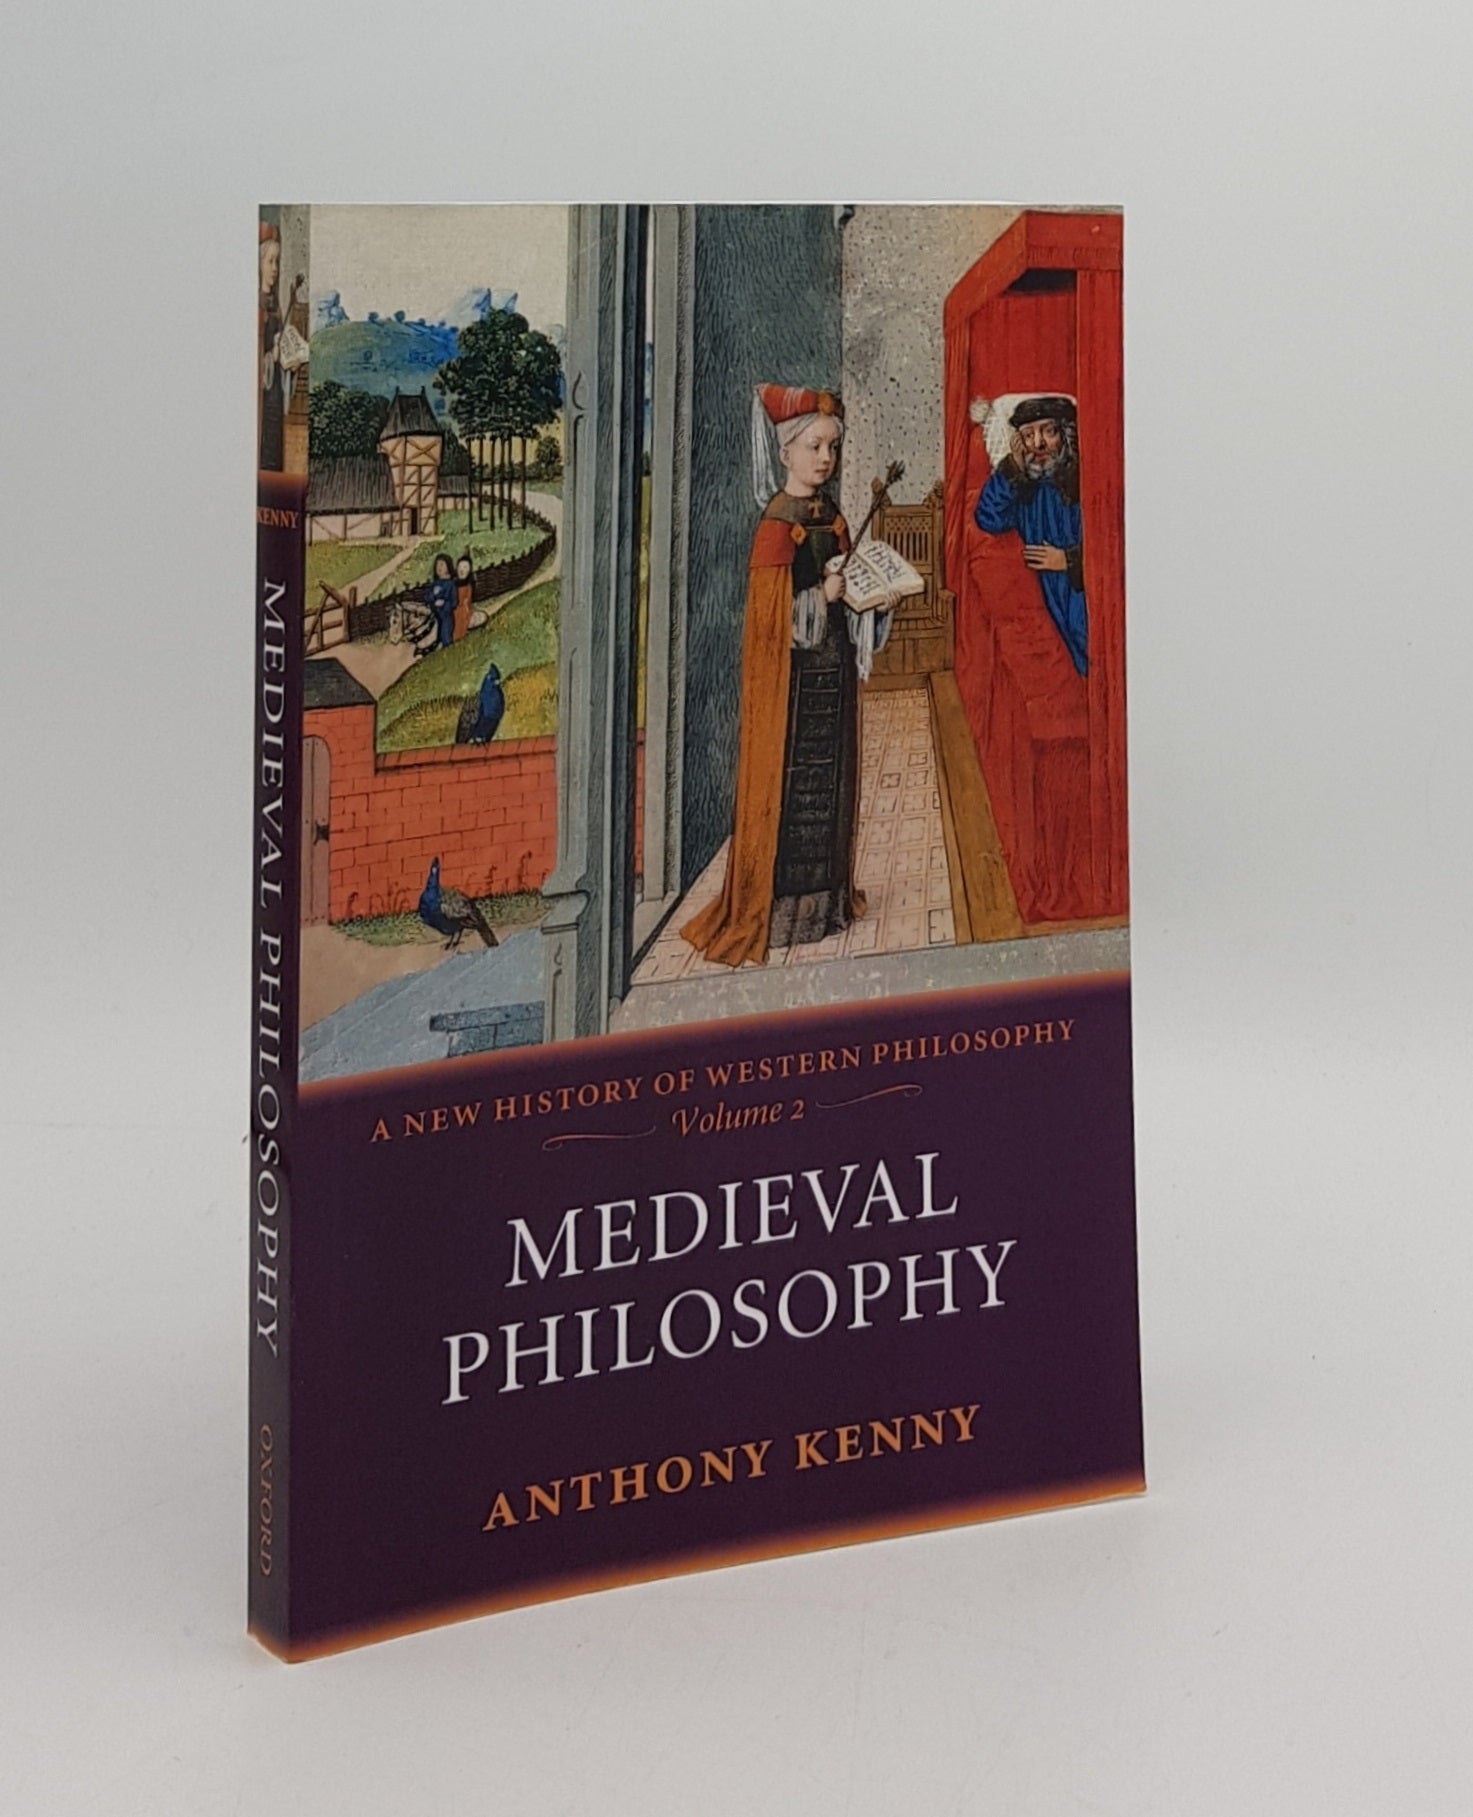 KENNY Anthony - Medieval Philosophy a New History of Western Philosophy Volume 2